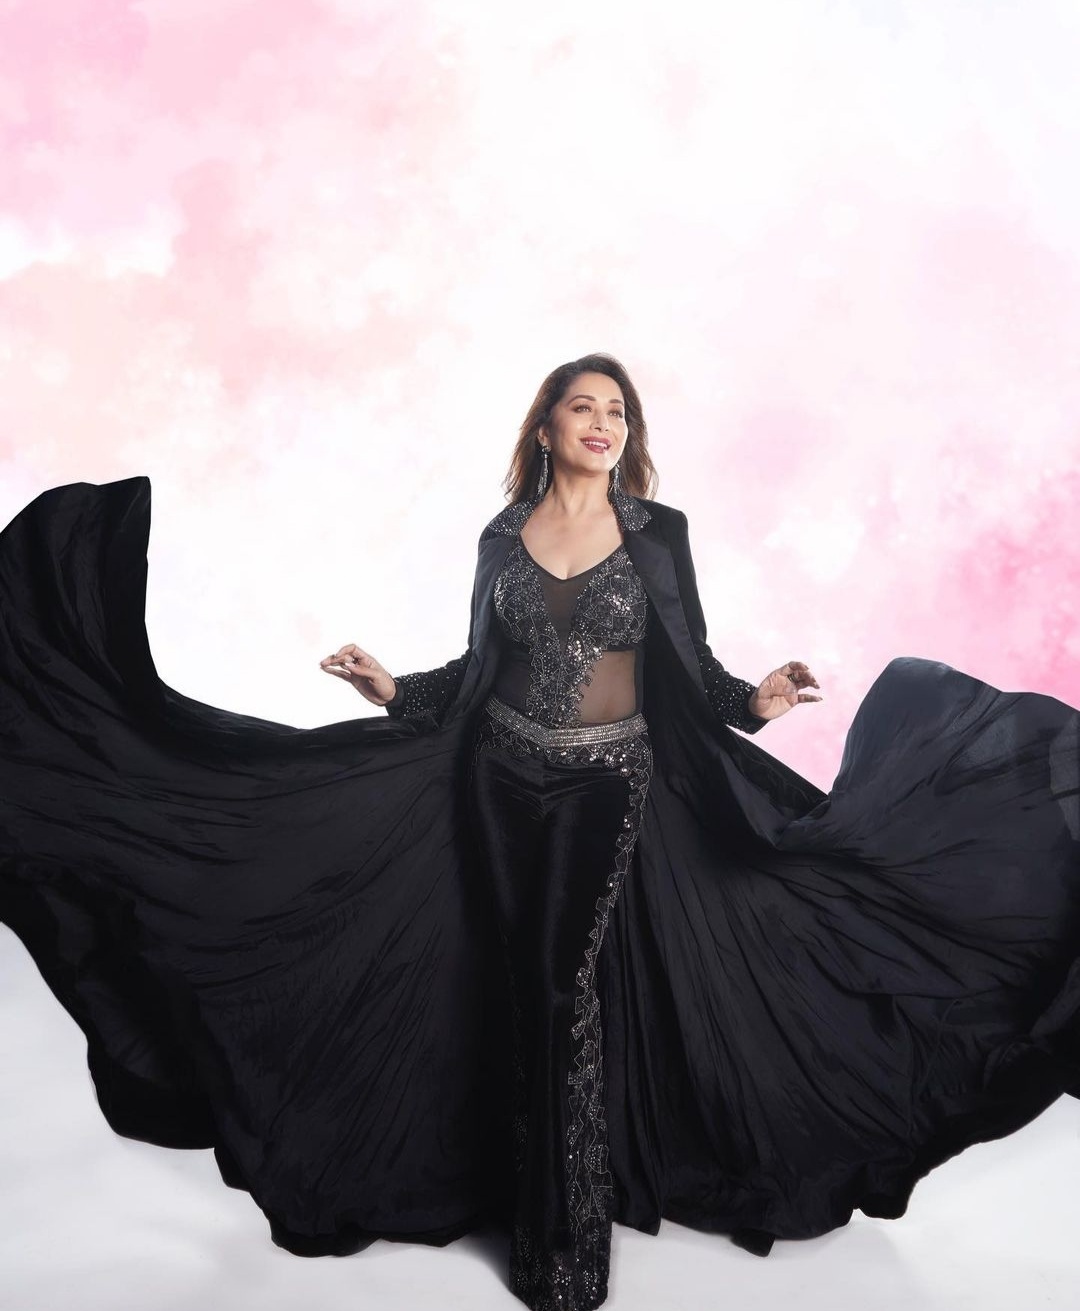 Madhuri Dixit wows in black ensemble for her music video